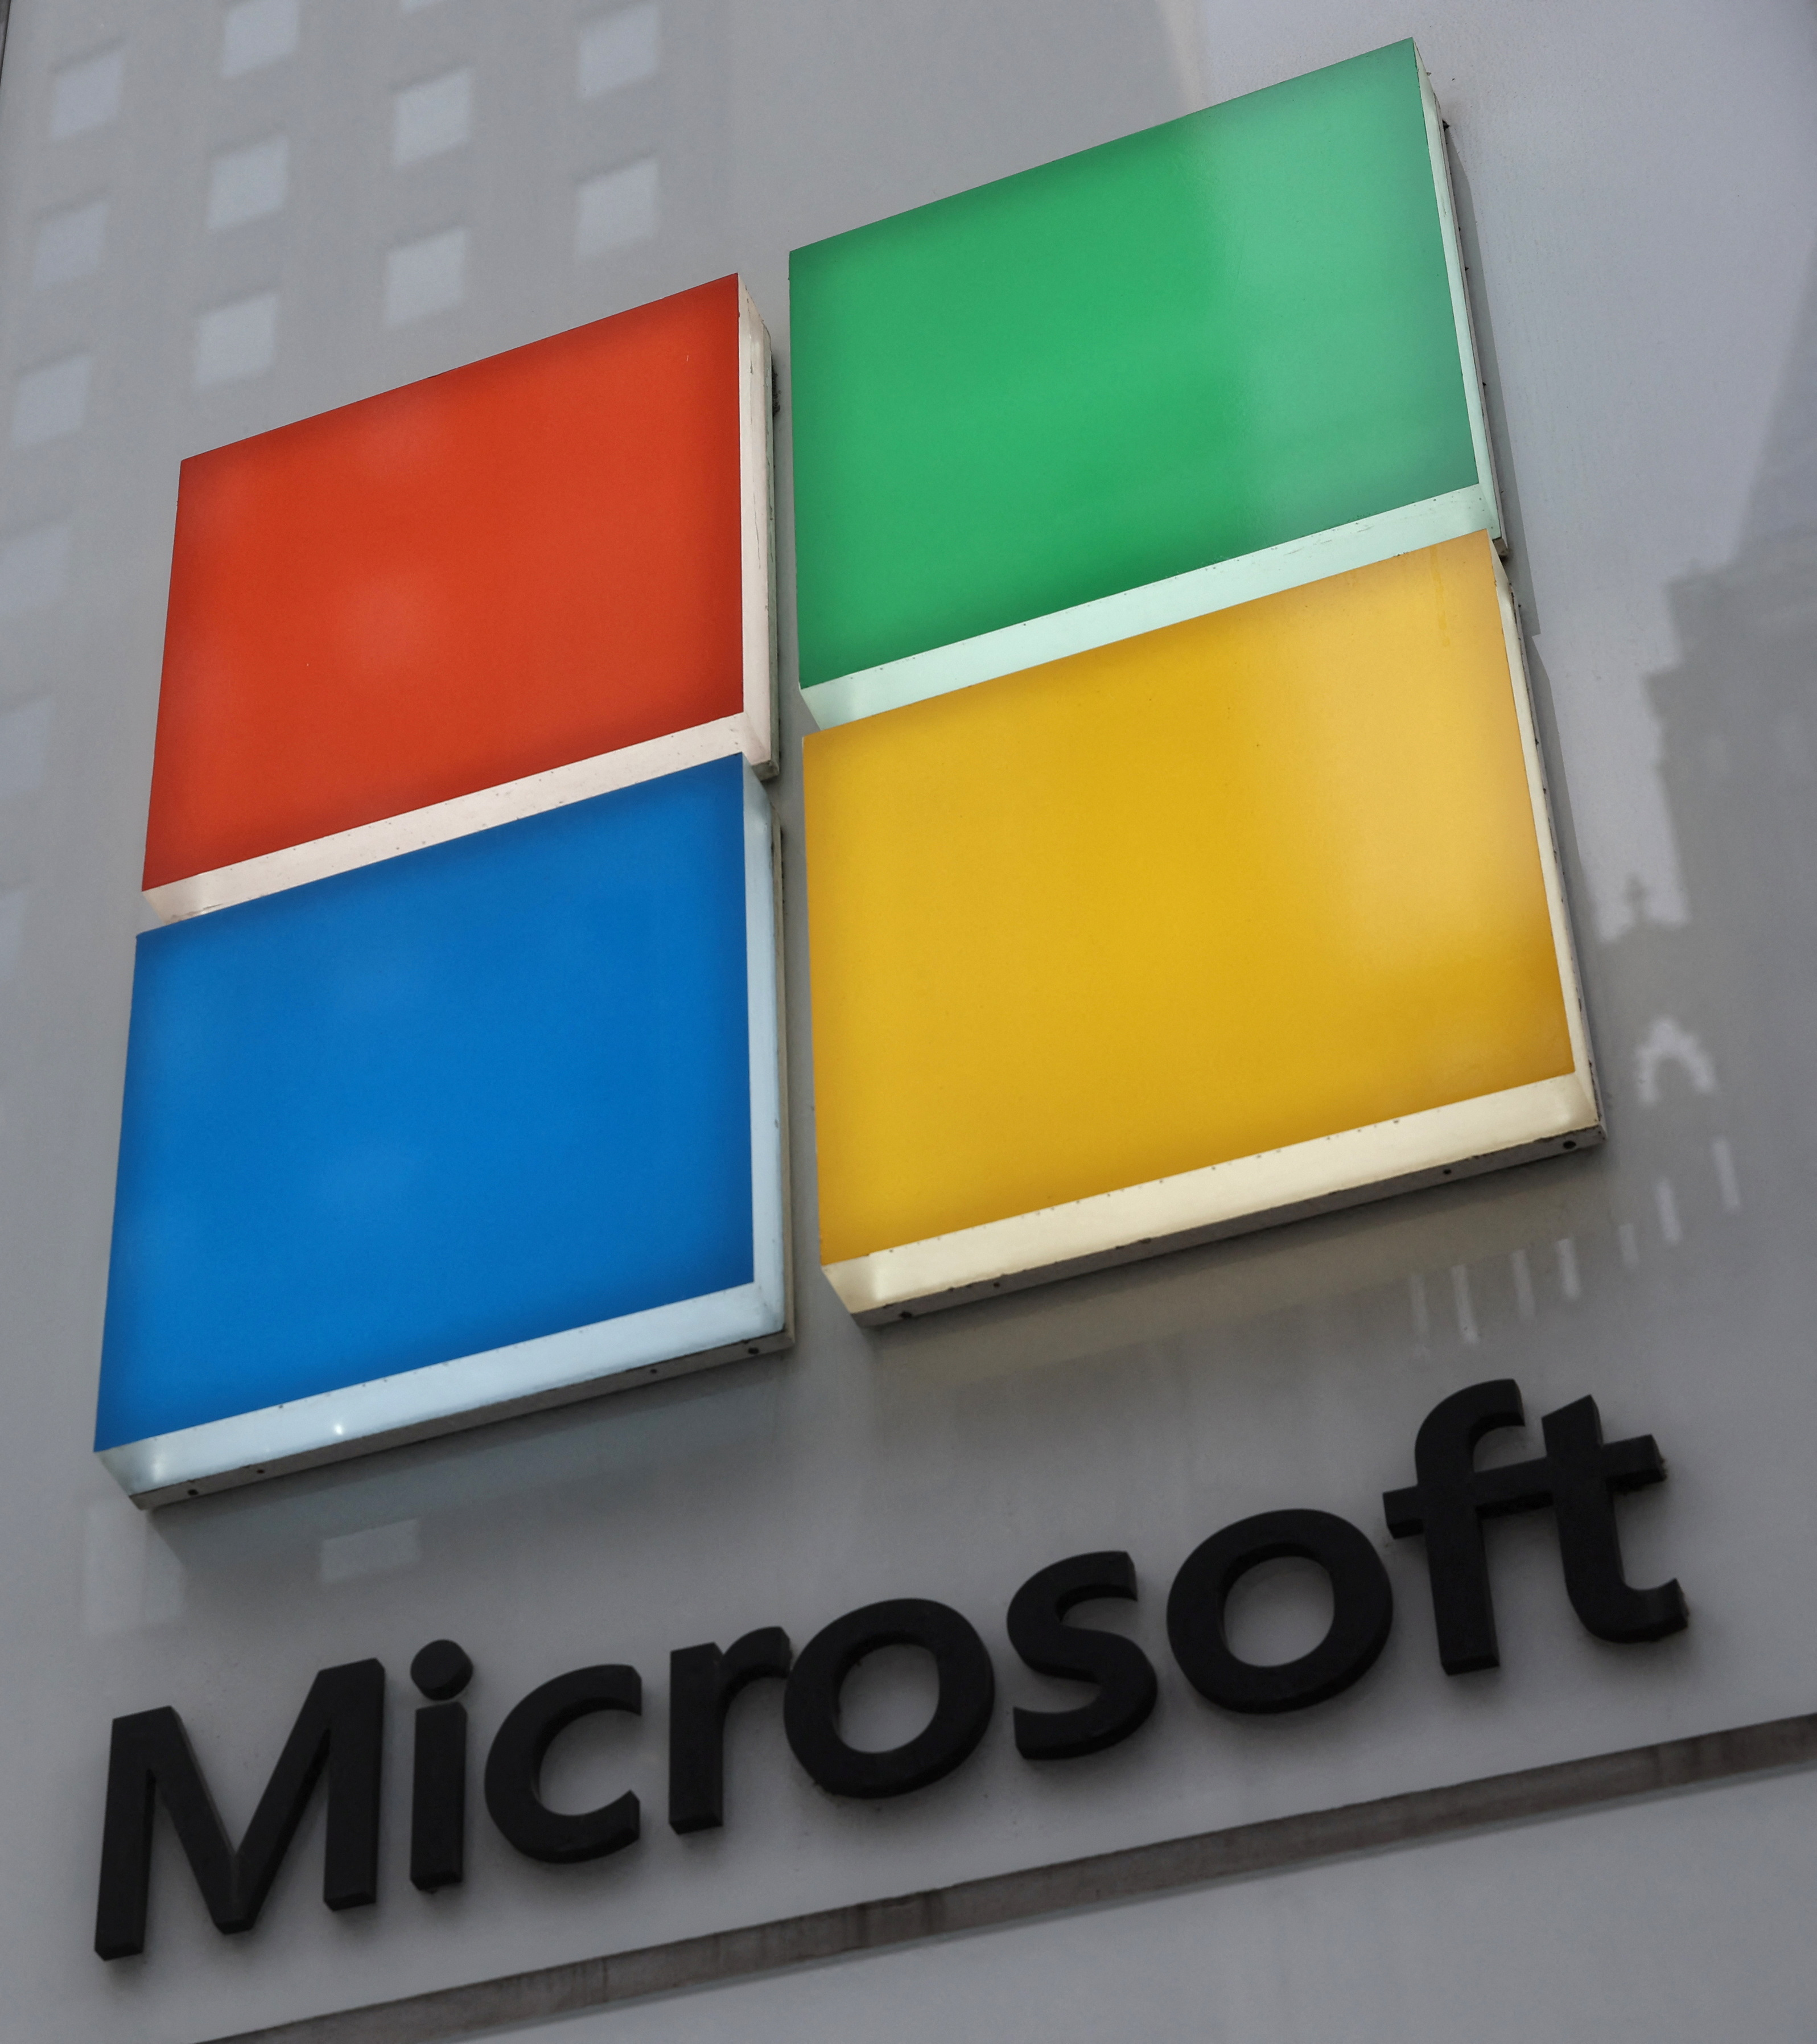 The Microsoft logo is seen outside the Microsoft Experience Center in New York City